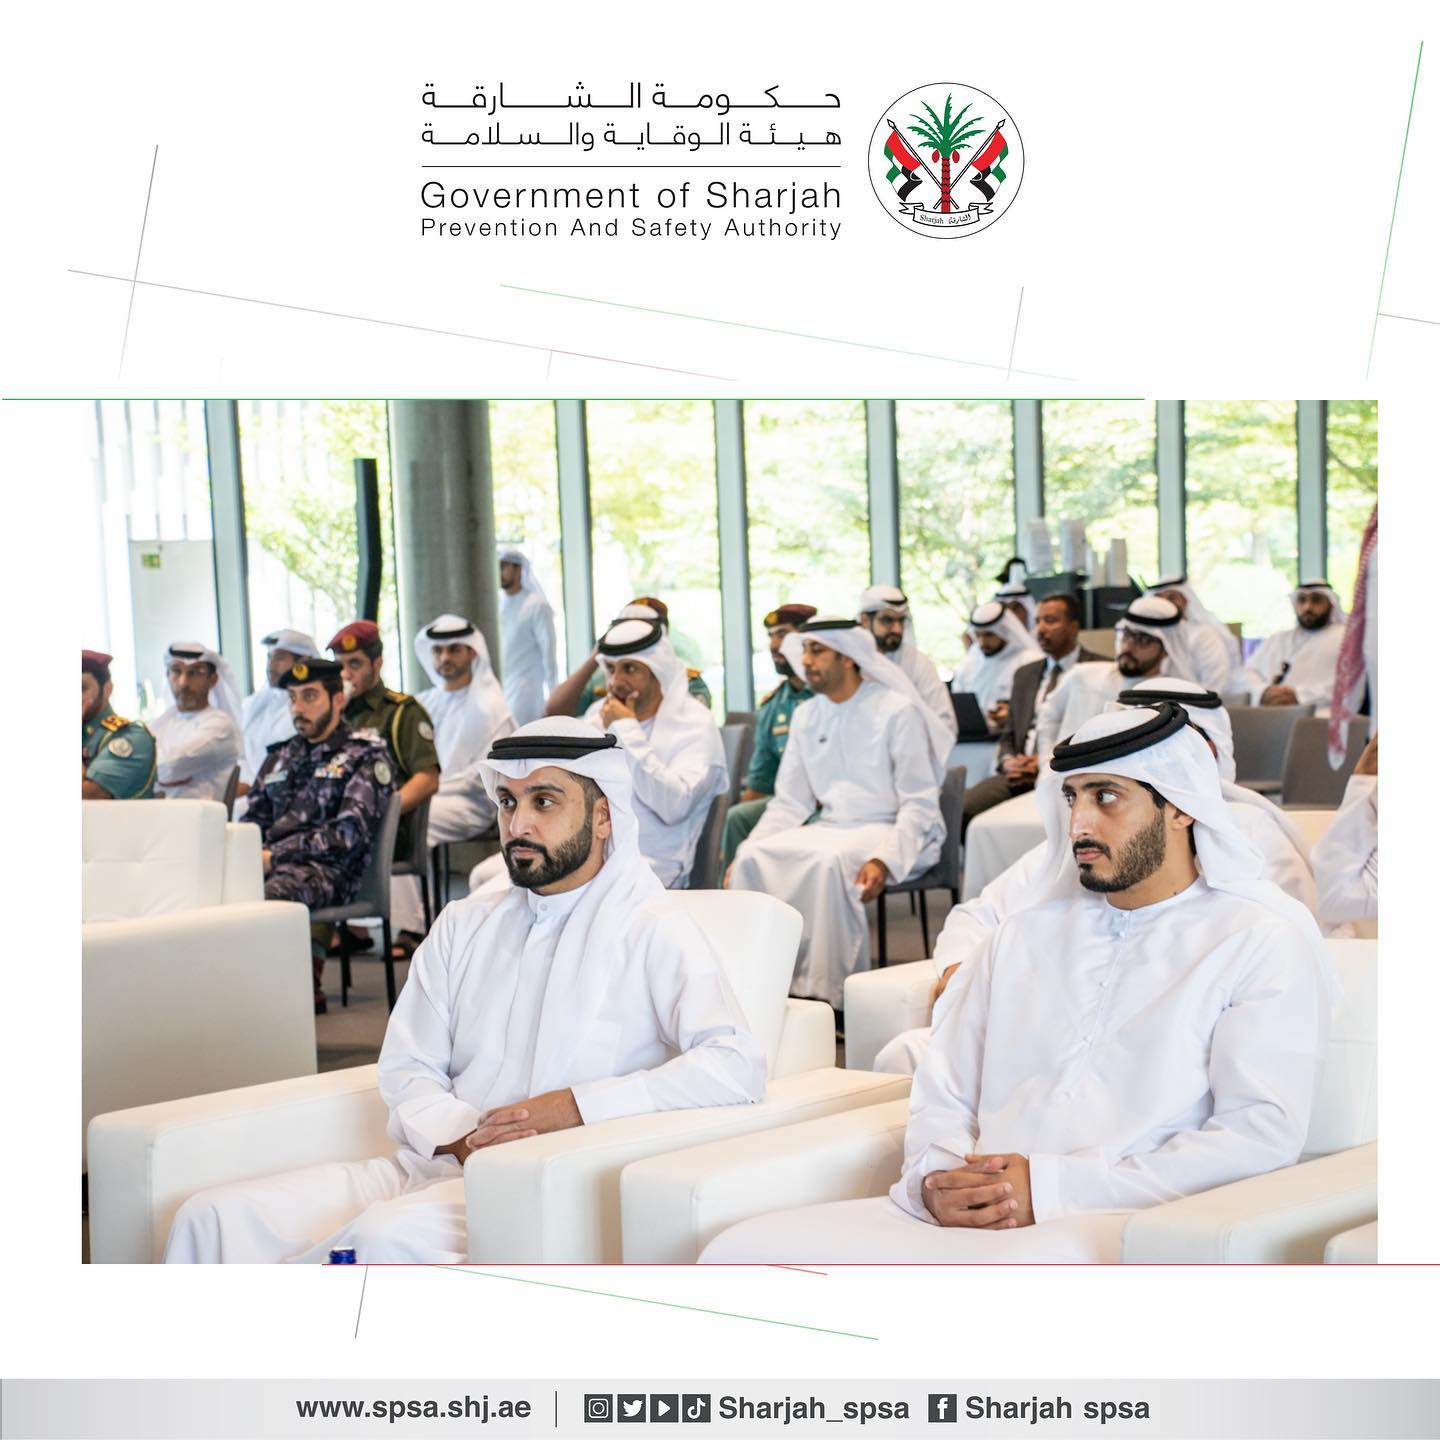 Ceremony honoring government agencies that have implemented a business continuity committee system